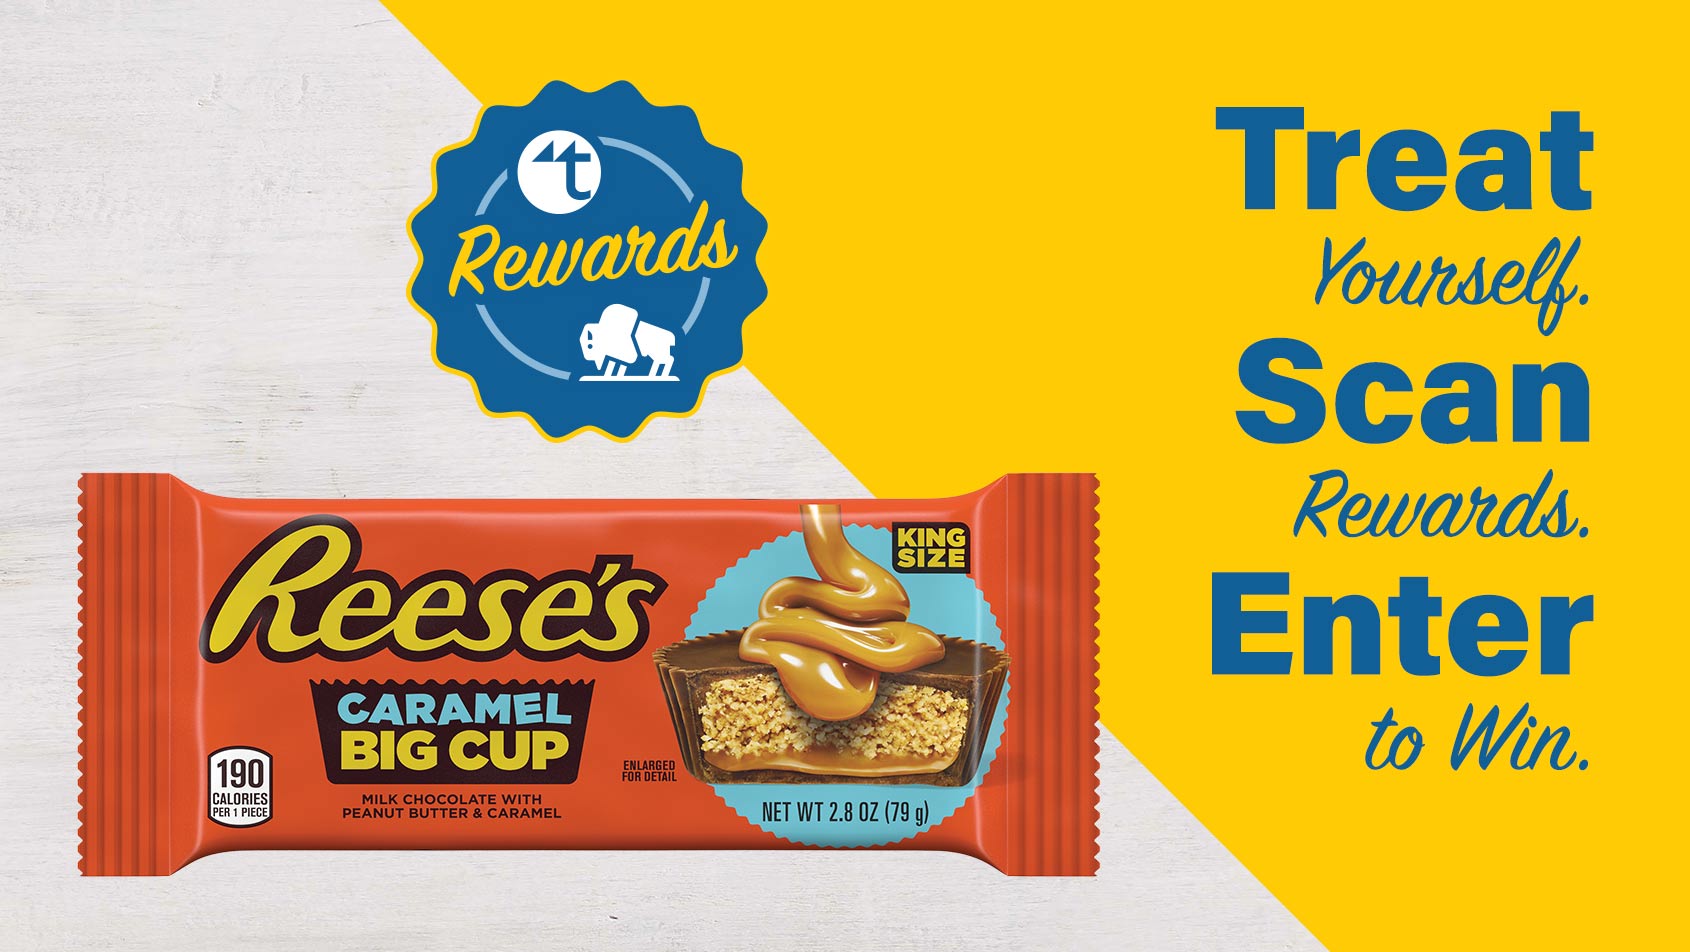 Buy a Reese's Caramel Big Cup and Win Free Gas!